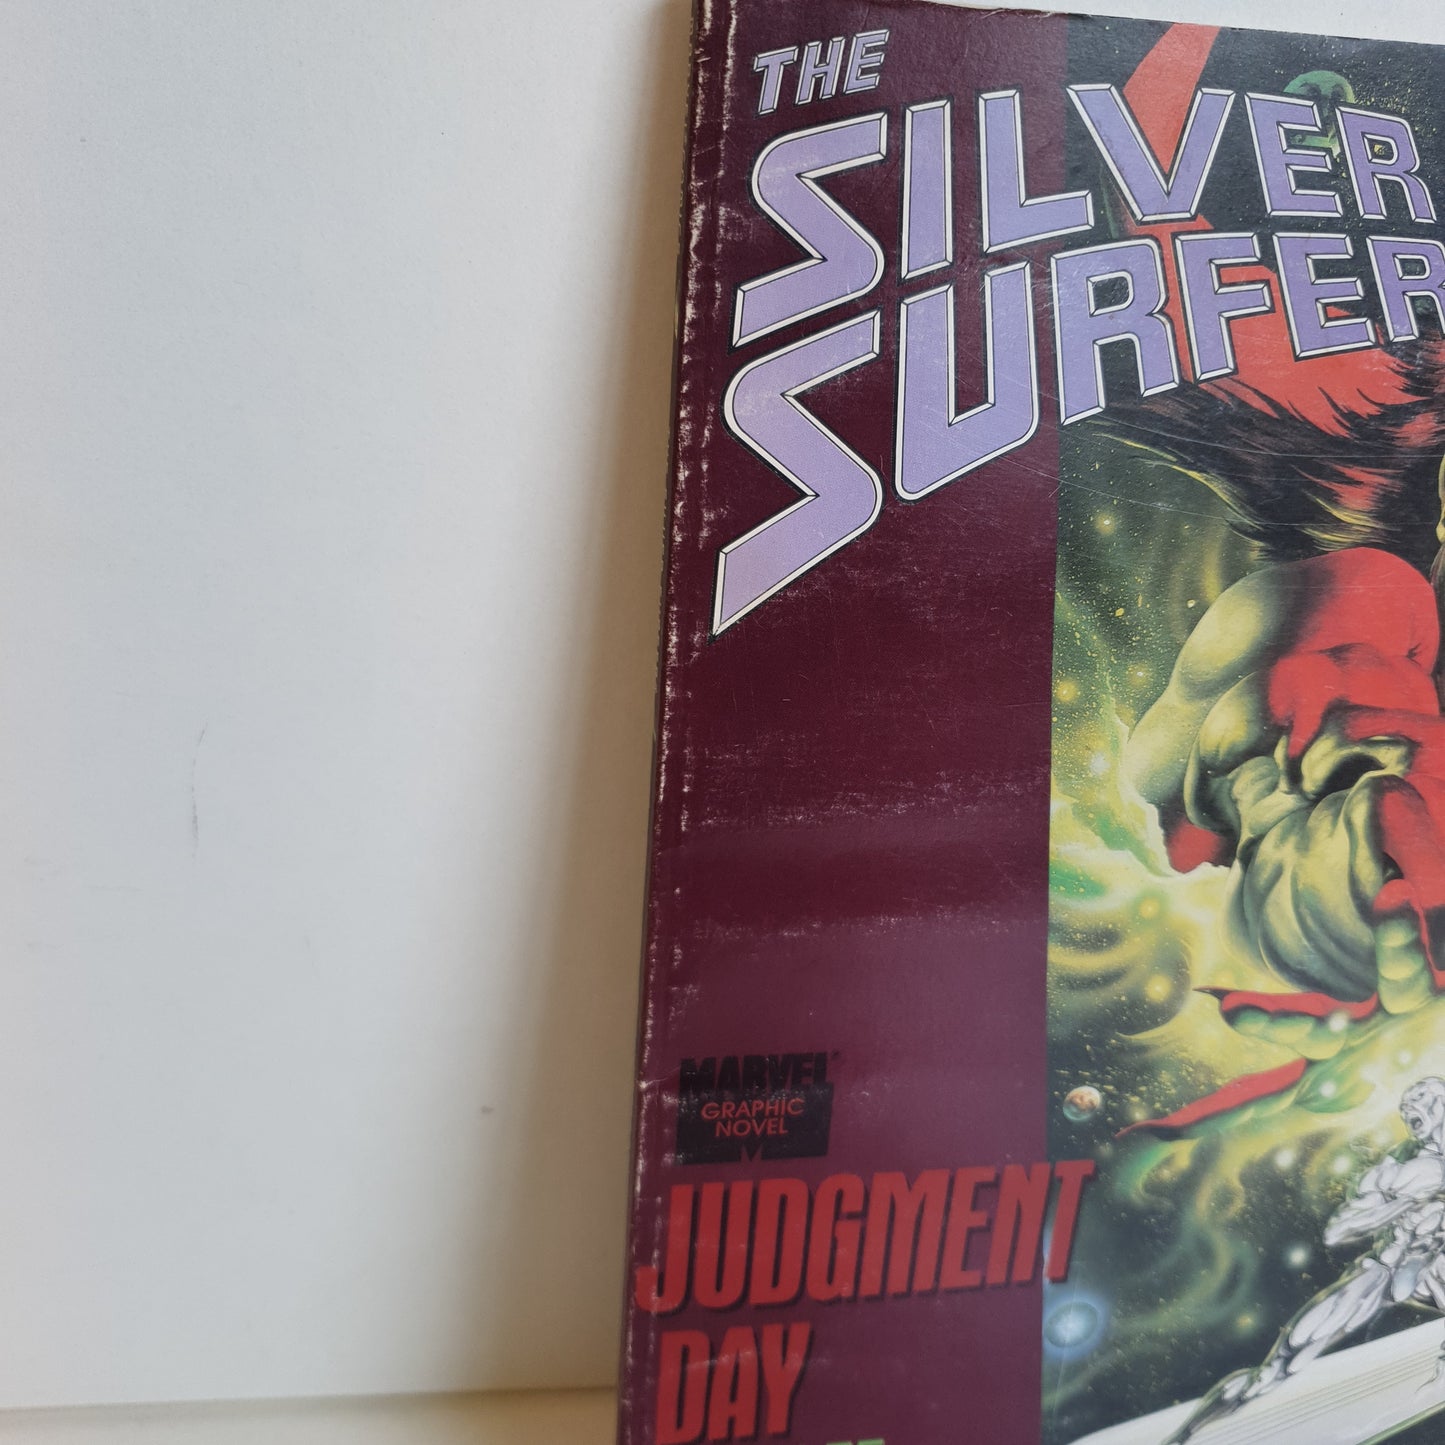 The Silver Surfer Judgement Day by Stan Lee & John Buscema (1988)